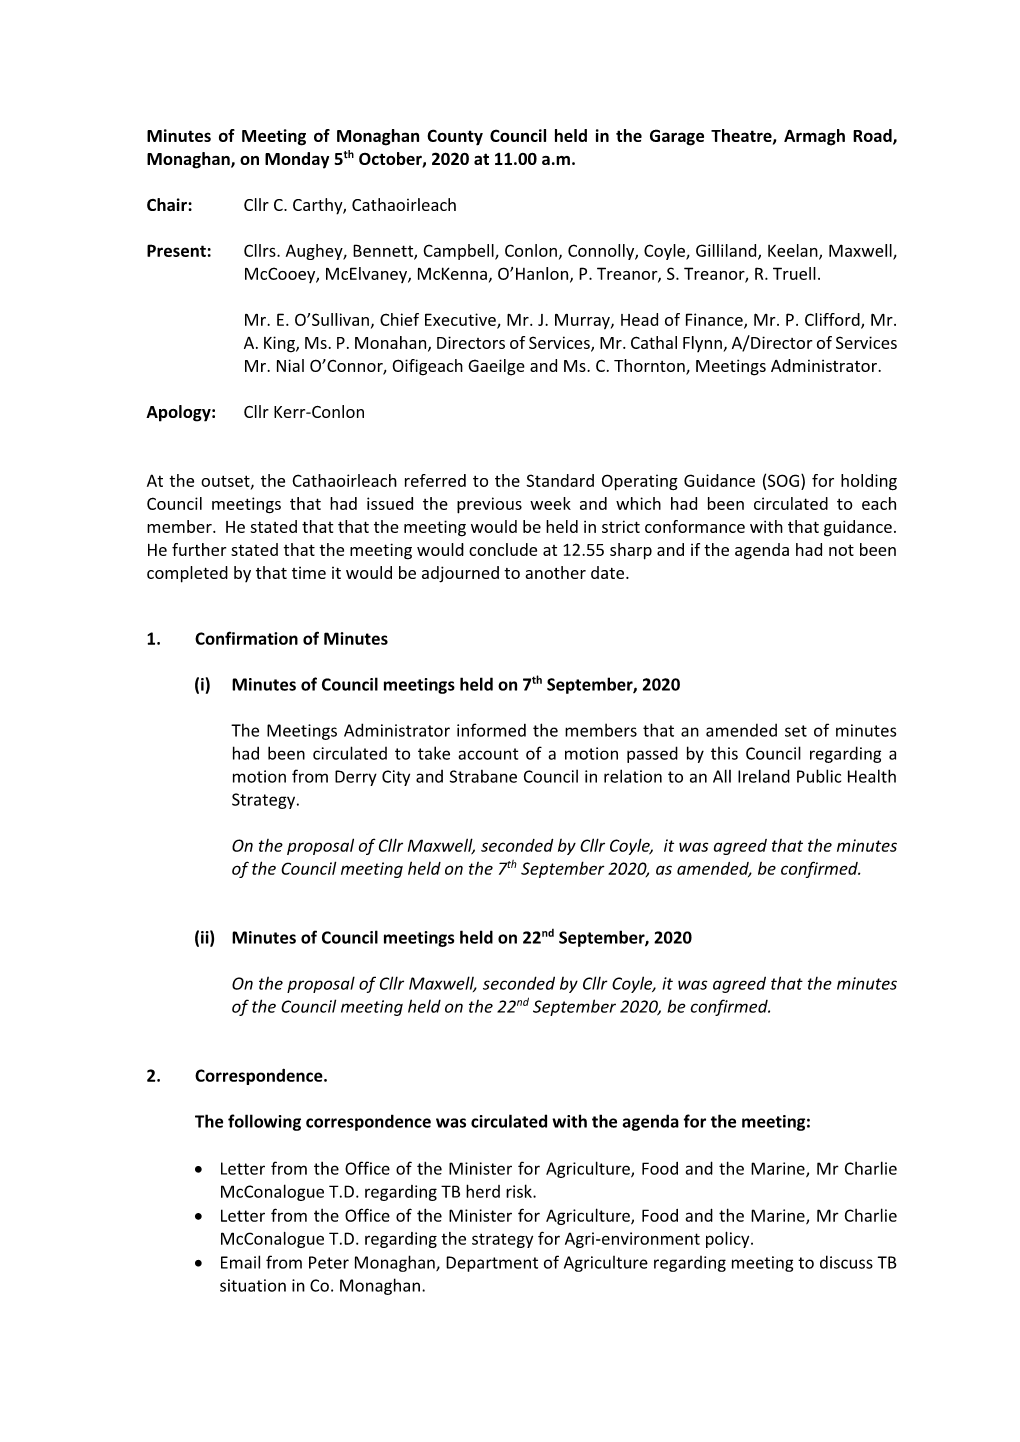 Council Meeting Minutes 5Th October 2020